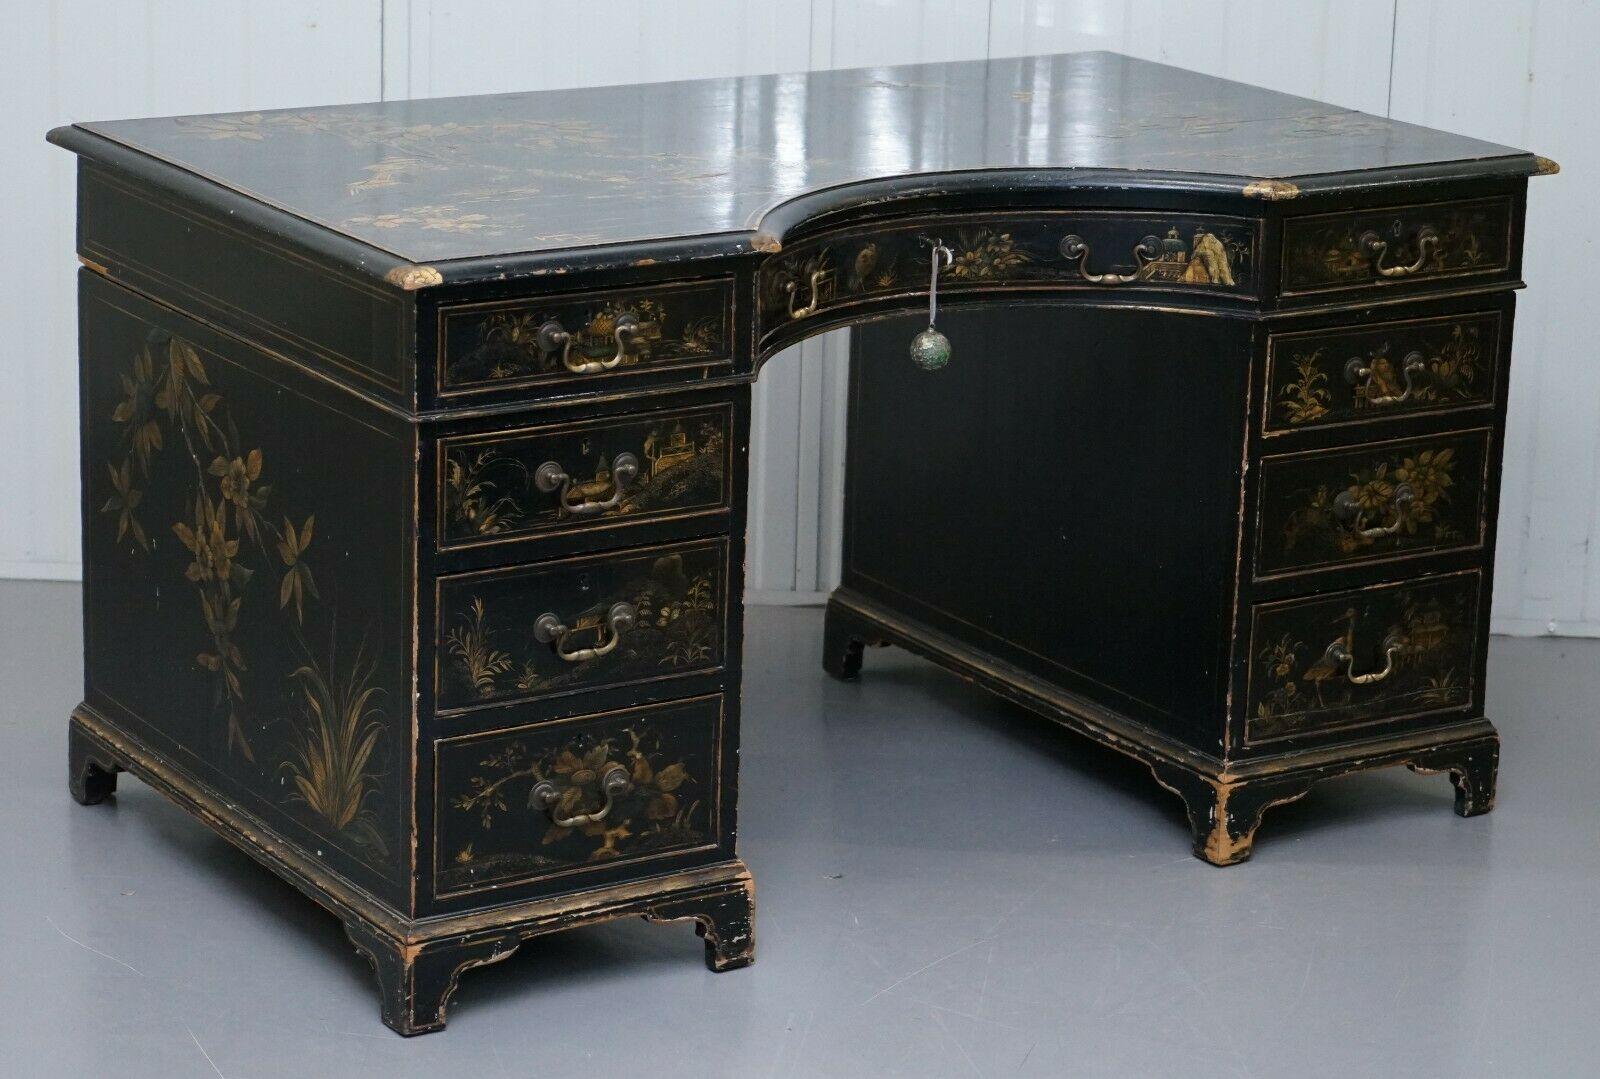 We are delighted to offer for sale this stunning and very rare 19th century Chinoiserie Japaned lacquered twin pedestal partner desk circa 1860.

A very rare and desirable desk, this is a nice mid-Victorian example, the Georgian pieces are